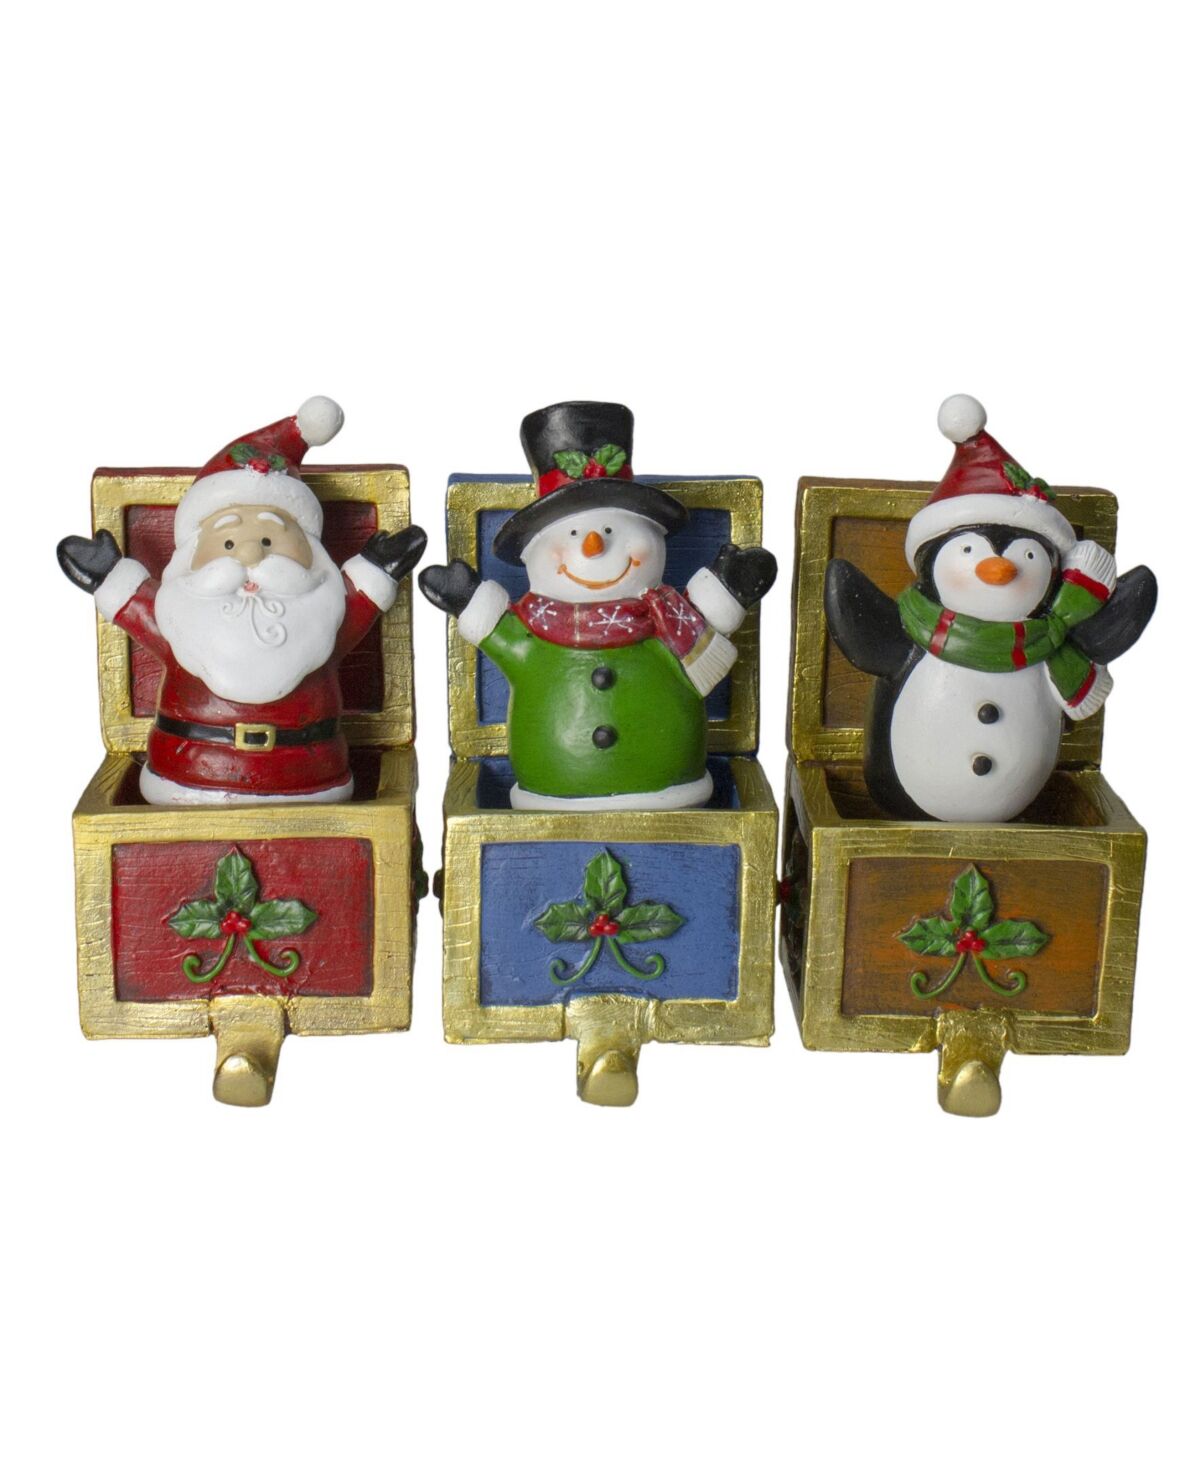 Northlight Santa Snowman and Penguin Jack in The Box Christmas Stocking Holders, Set of 3 - Red